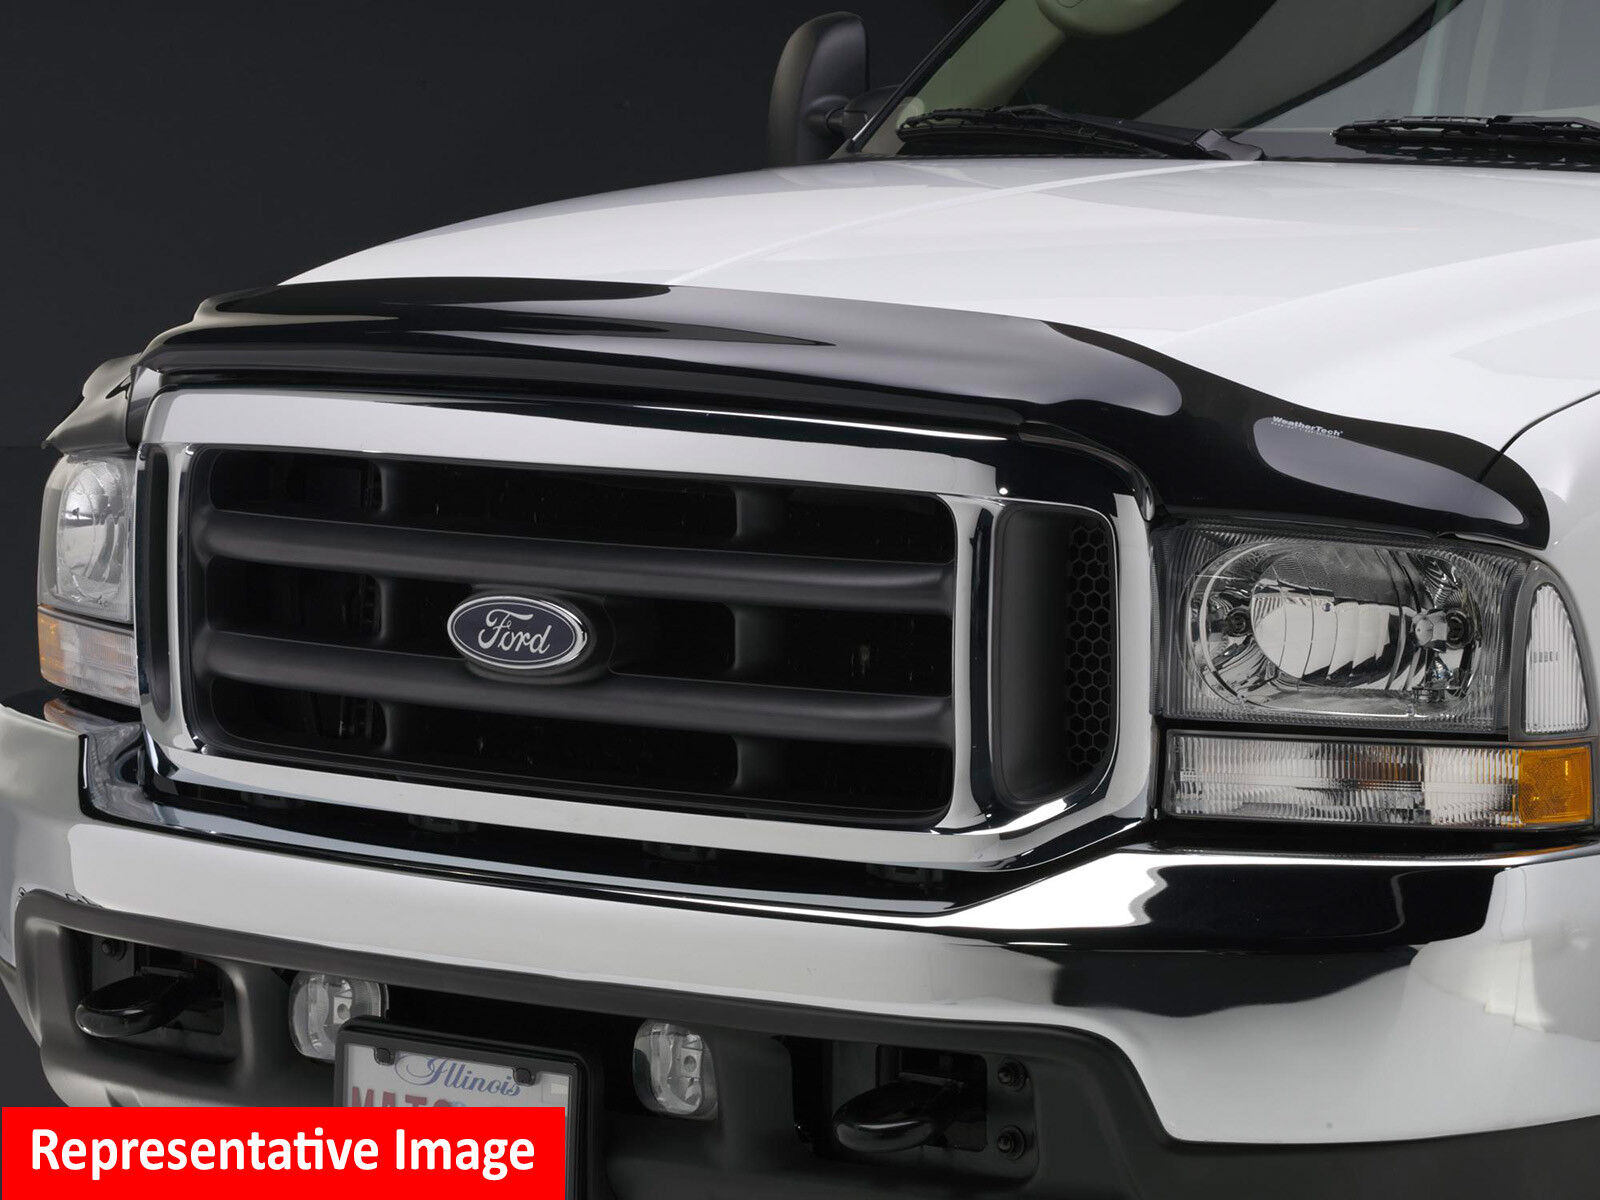 WeatherTech Stone & Bug Deflector Hood Shield for Ford Super Duty / Excursion